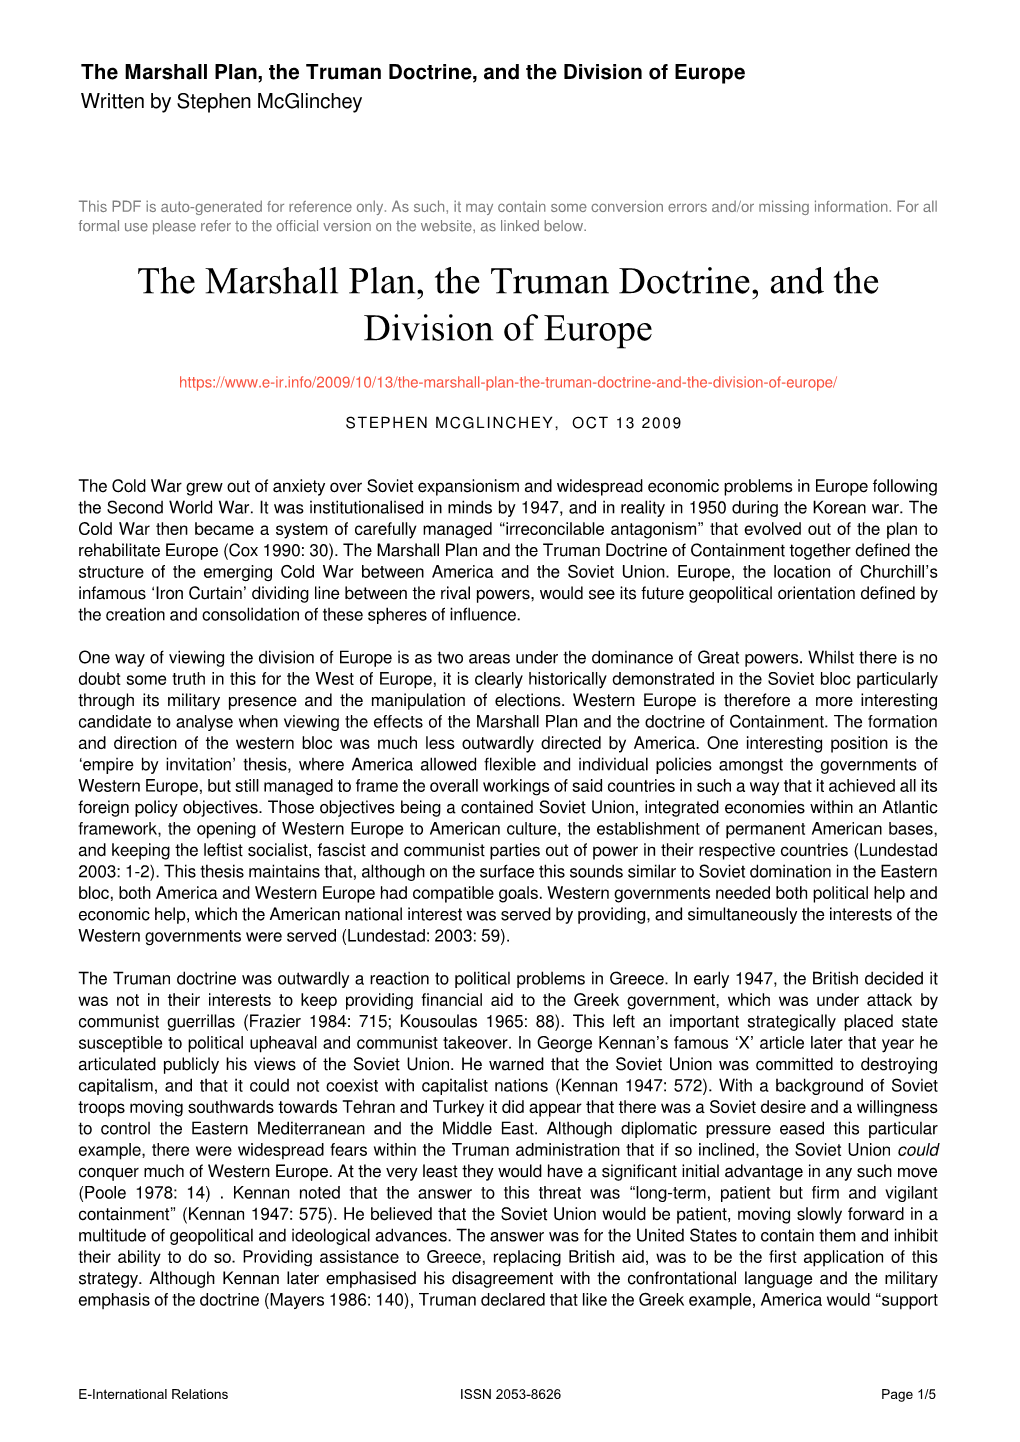 The Marshall Plan, the Truman Doctrine, and the Division of Europe Written by Stephen Mcglinchey